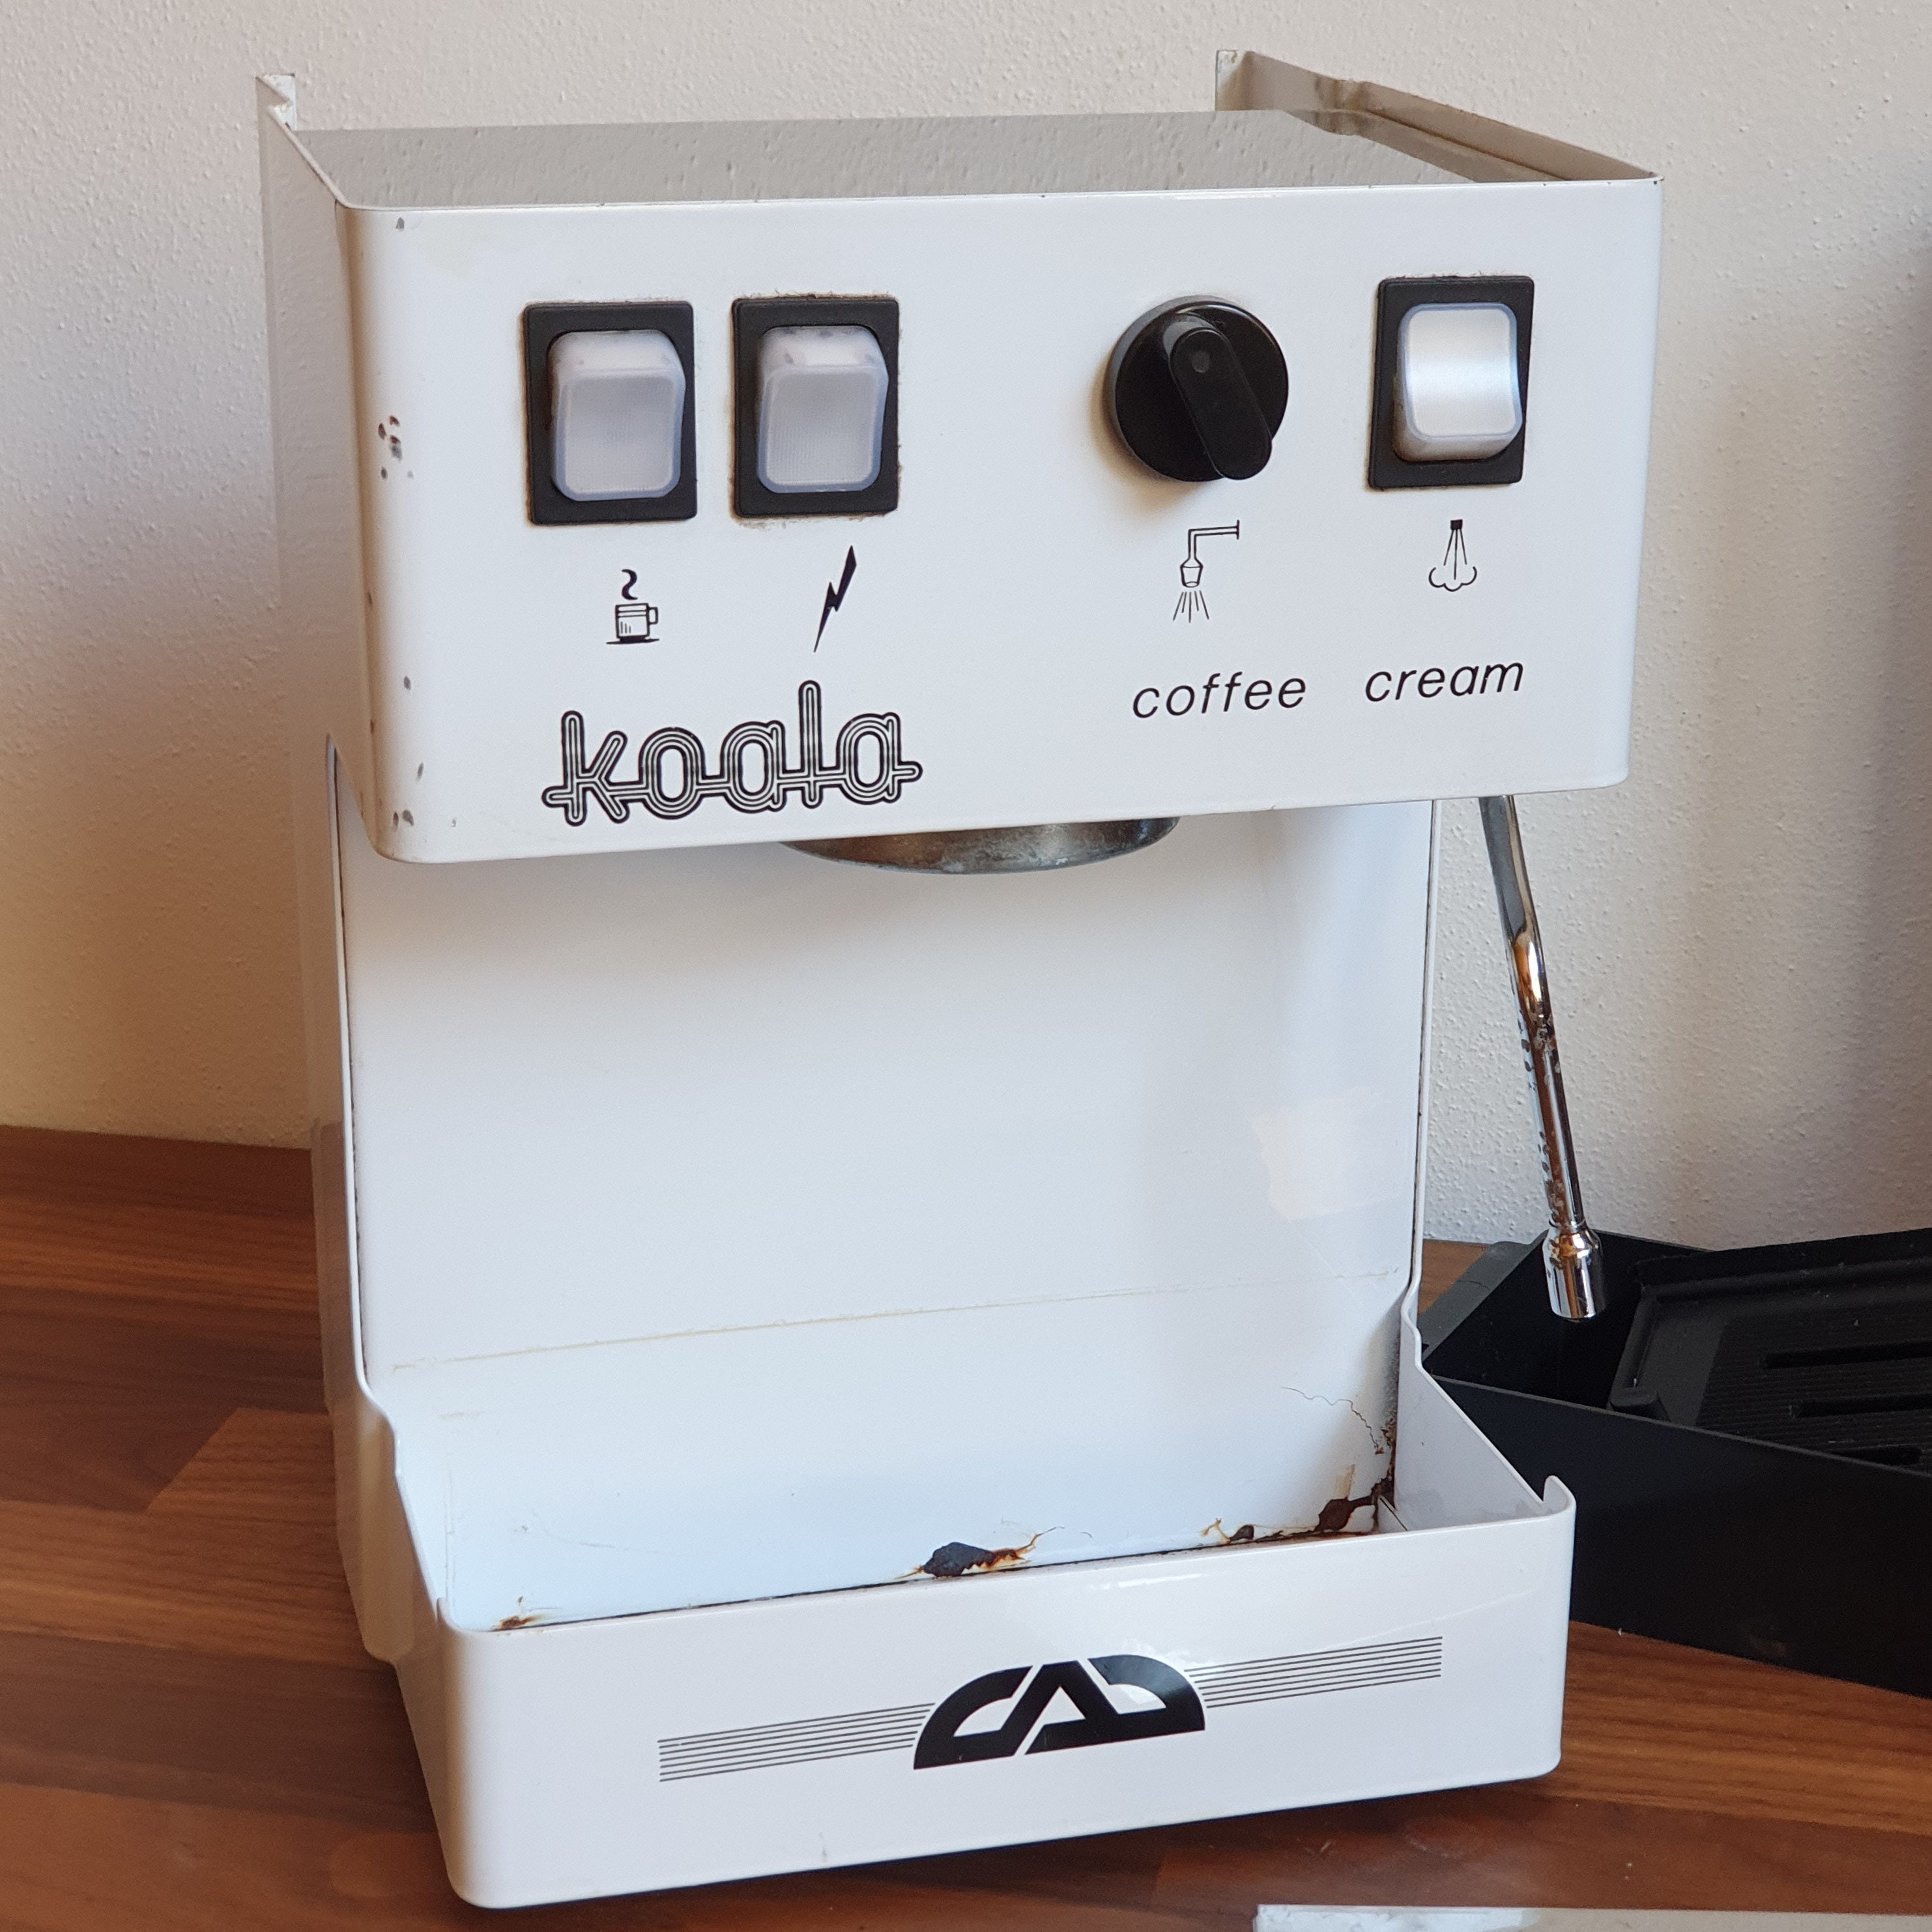 Electric Machine for Italian Espresso and Cappuccino, Vintage Coffee Maker  From the 80s and 90s Made in Italy Koala Coffee Cream 